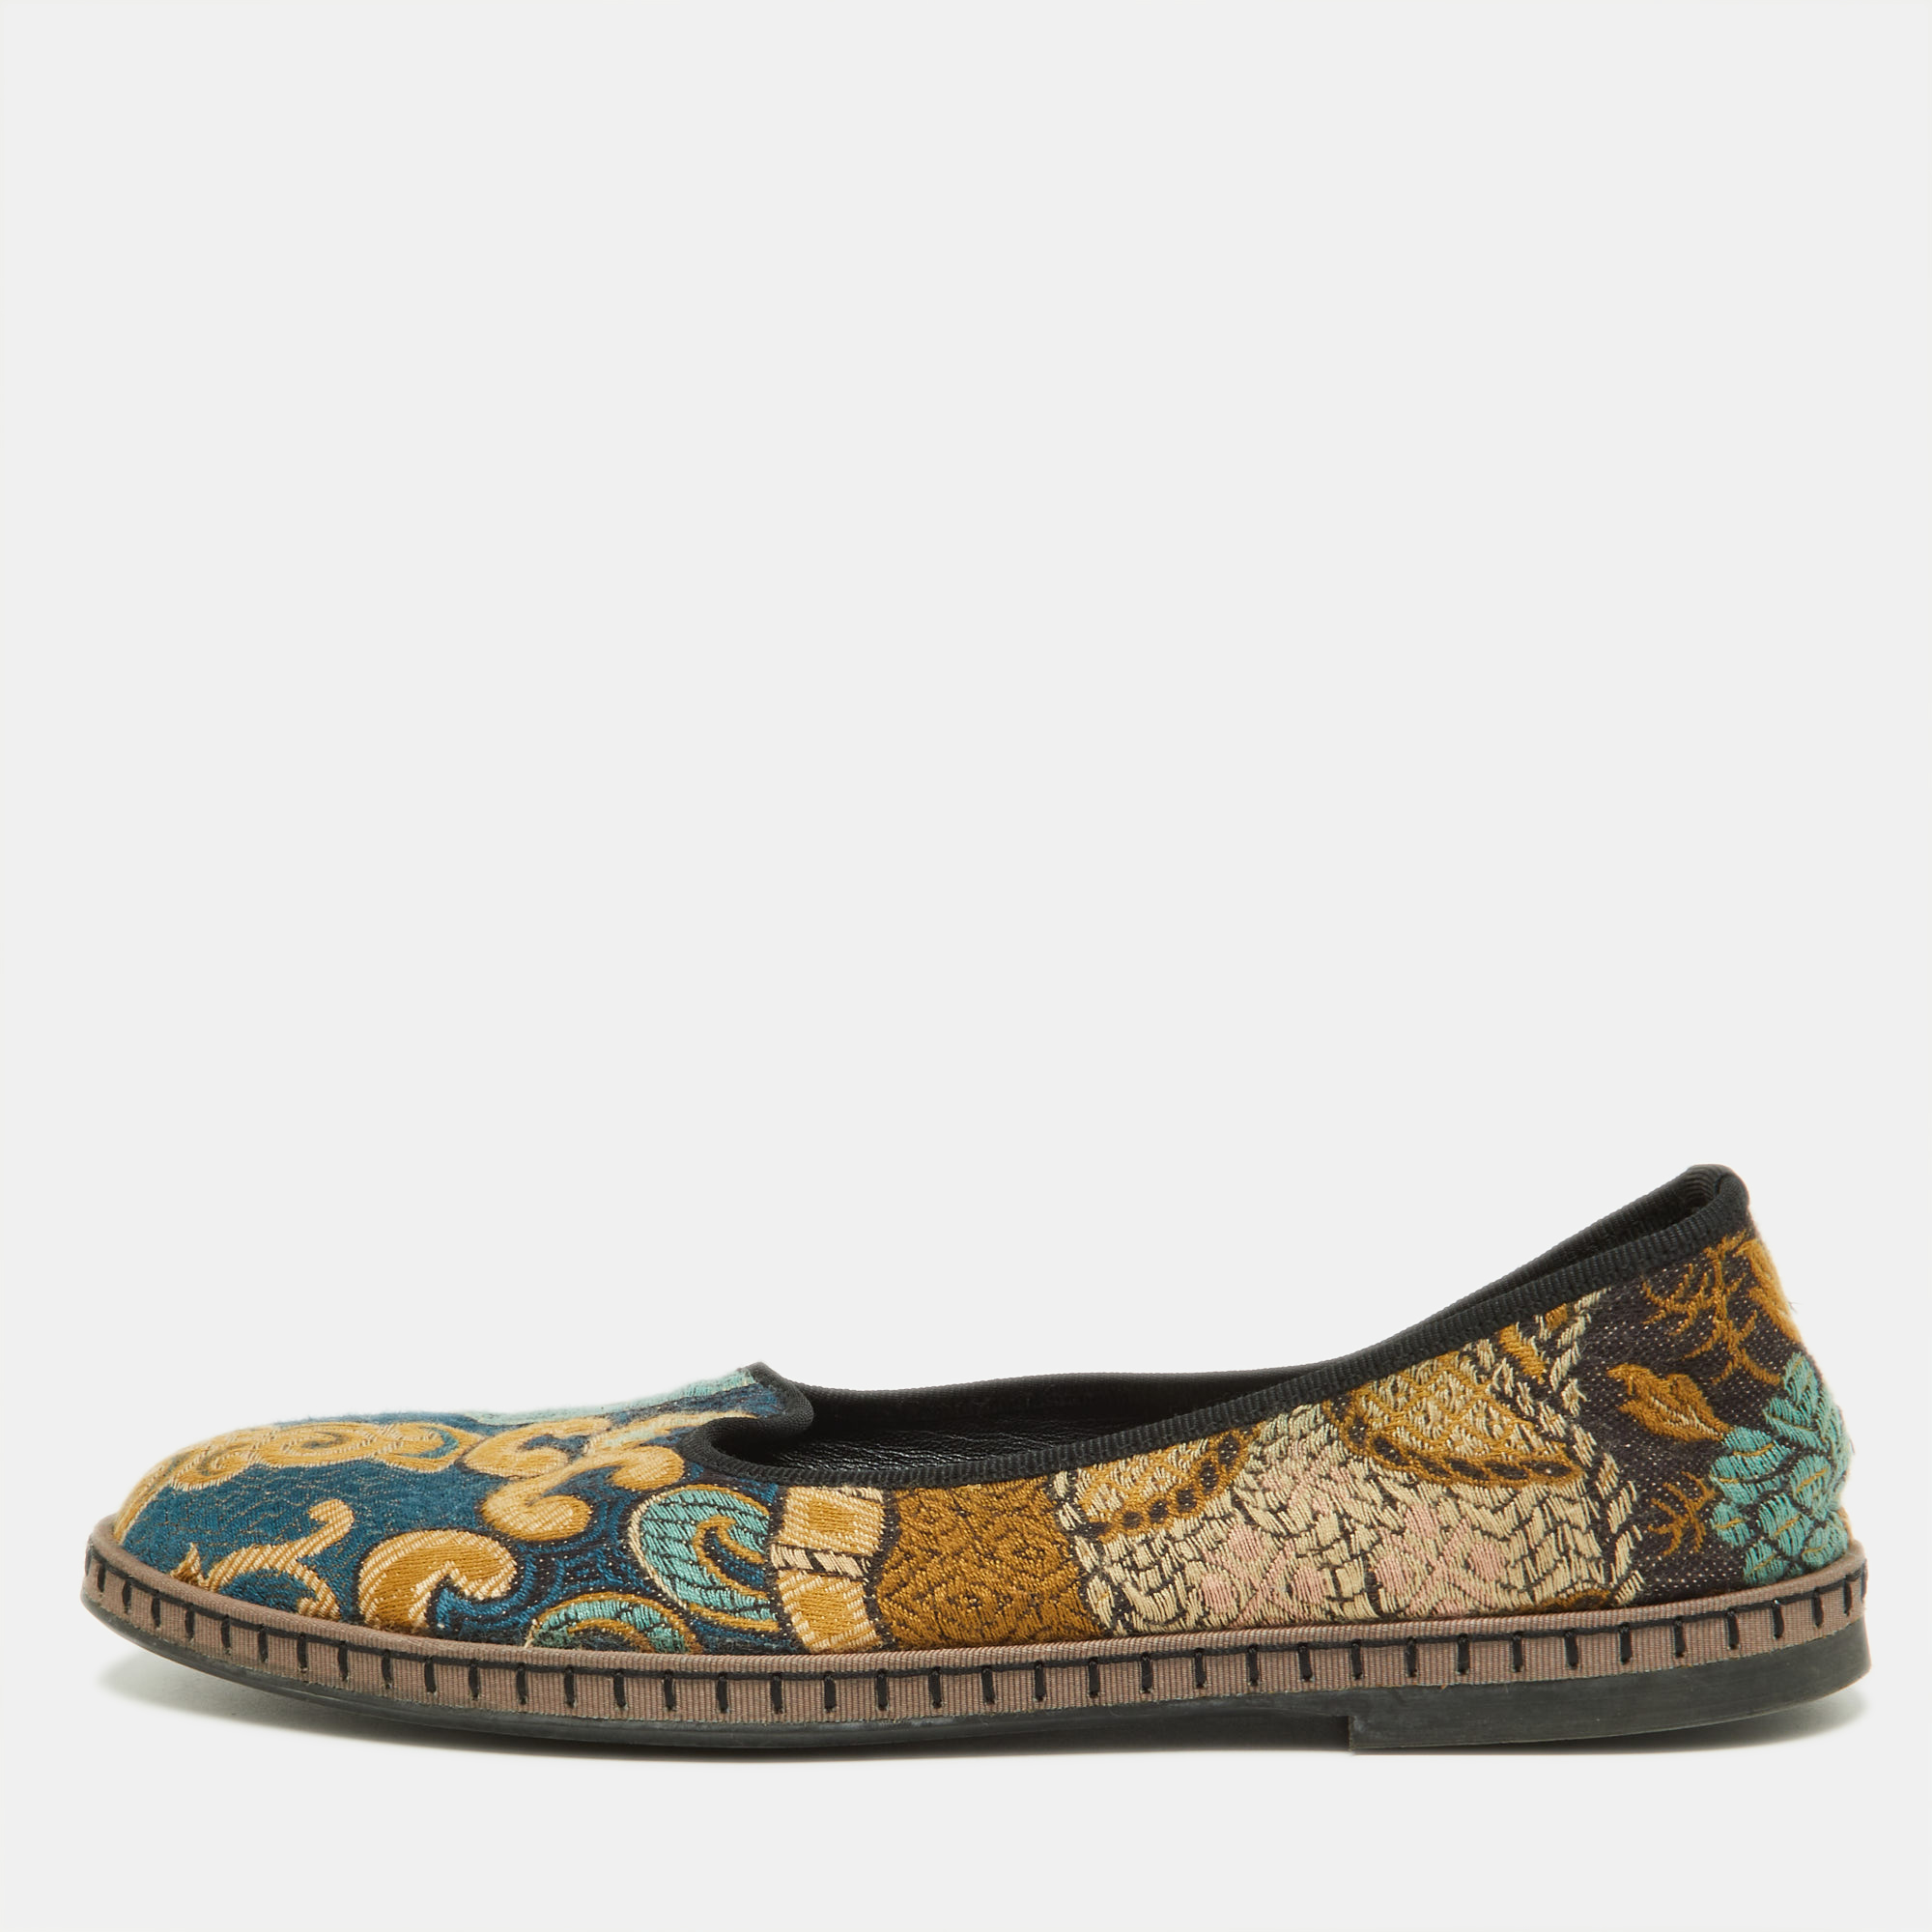 Pre-owned Etro Multicolor Embroidered Fabric Smoking Slippers Size 38